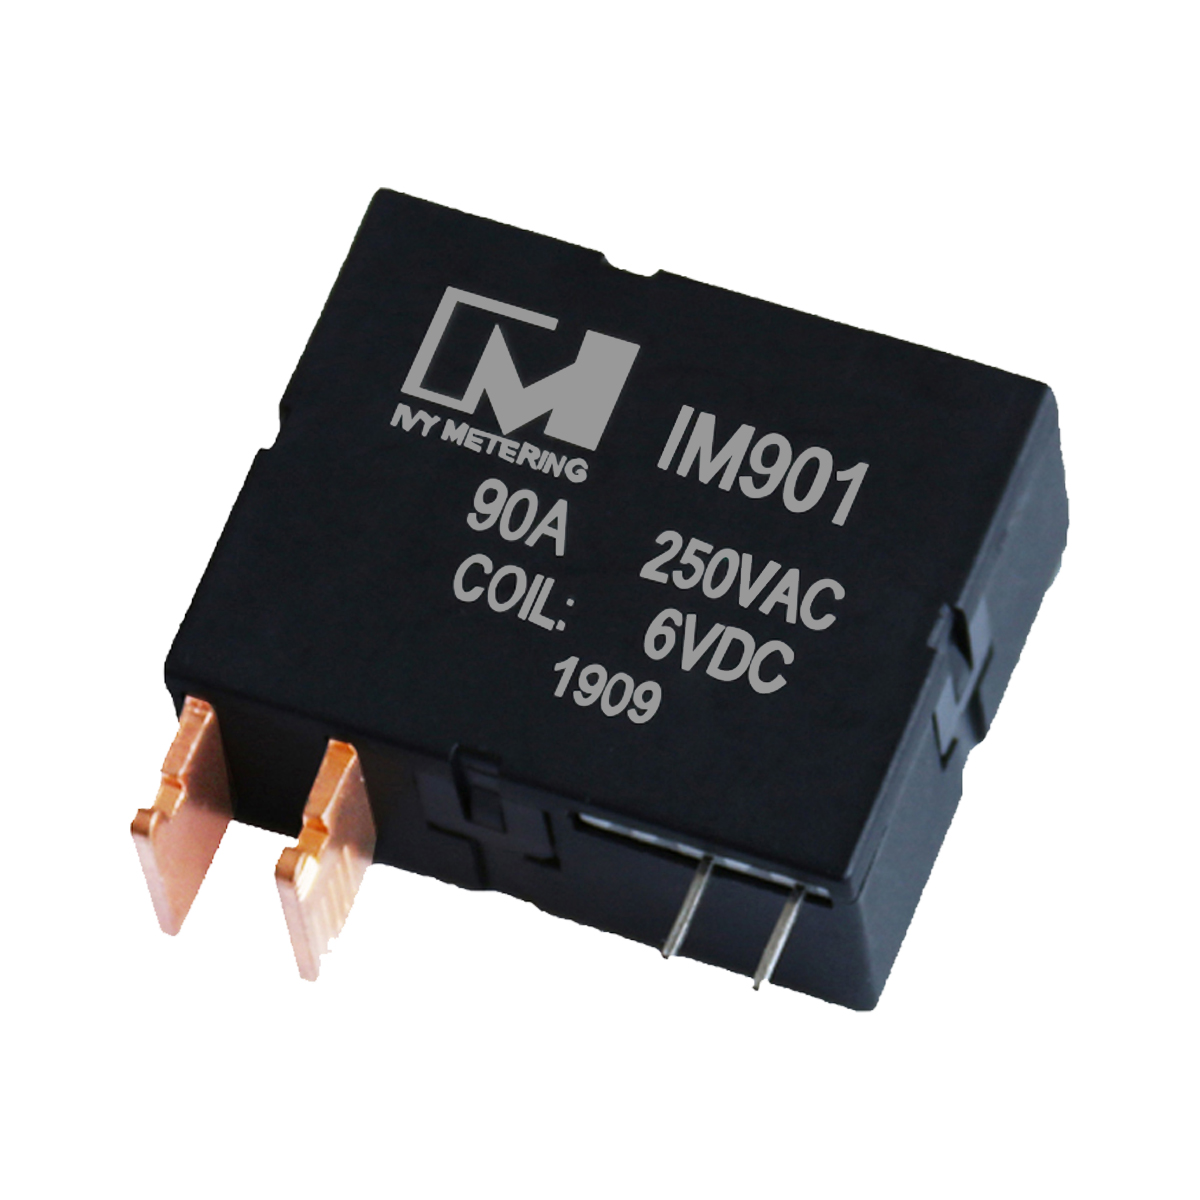 IM901 UC3 90A 250VAC Remote On-Off Single Phase AC Latching Relay for Street Light Automation